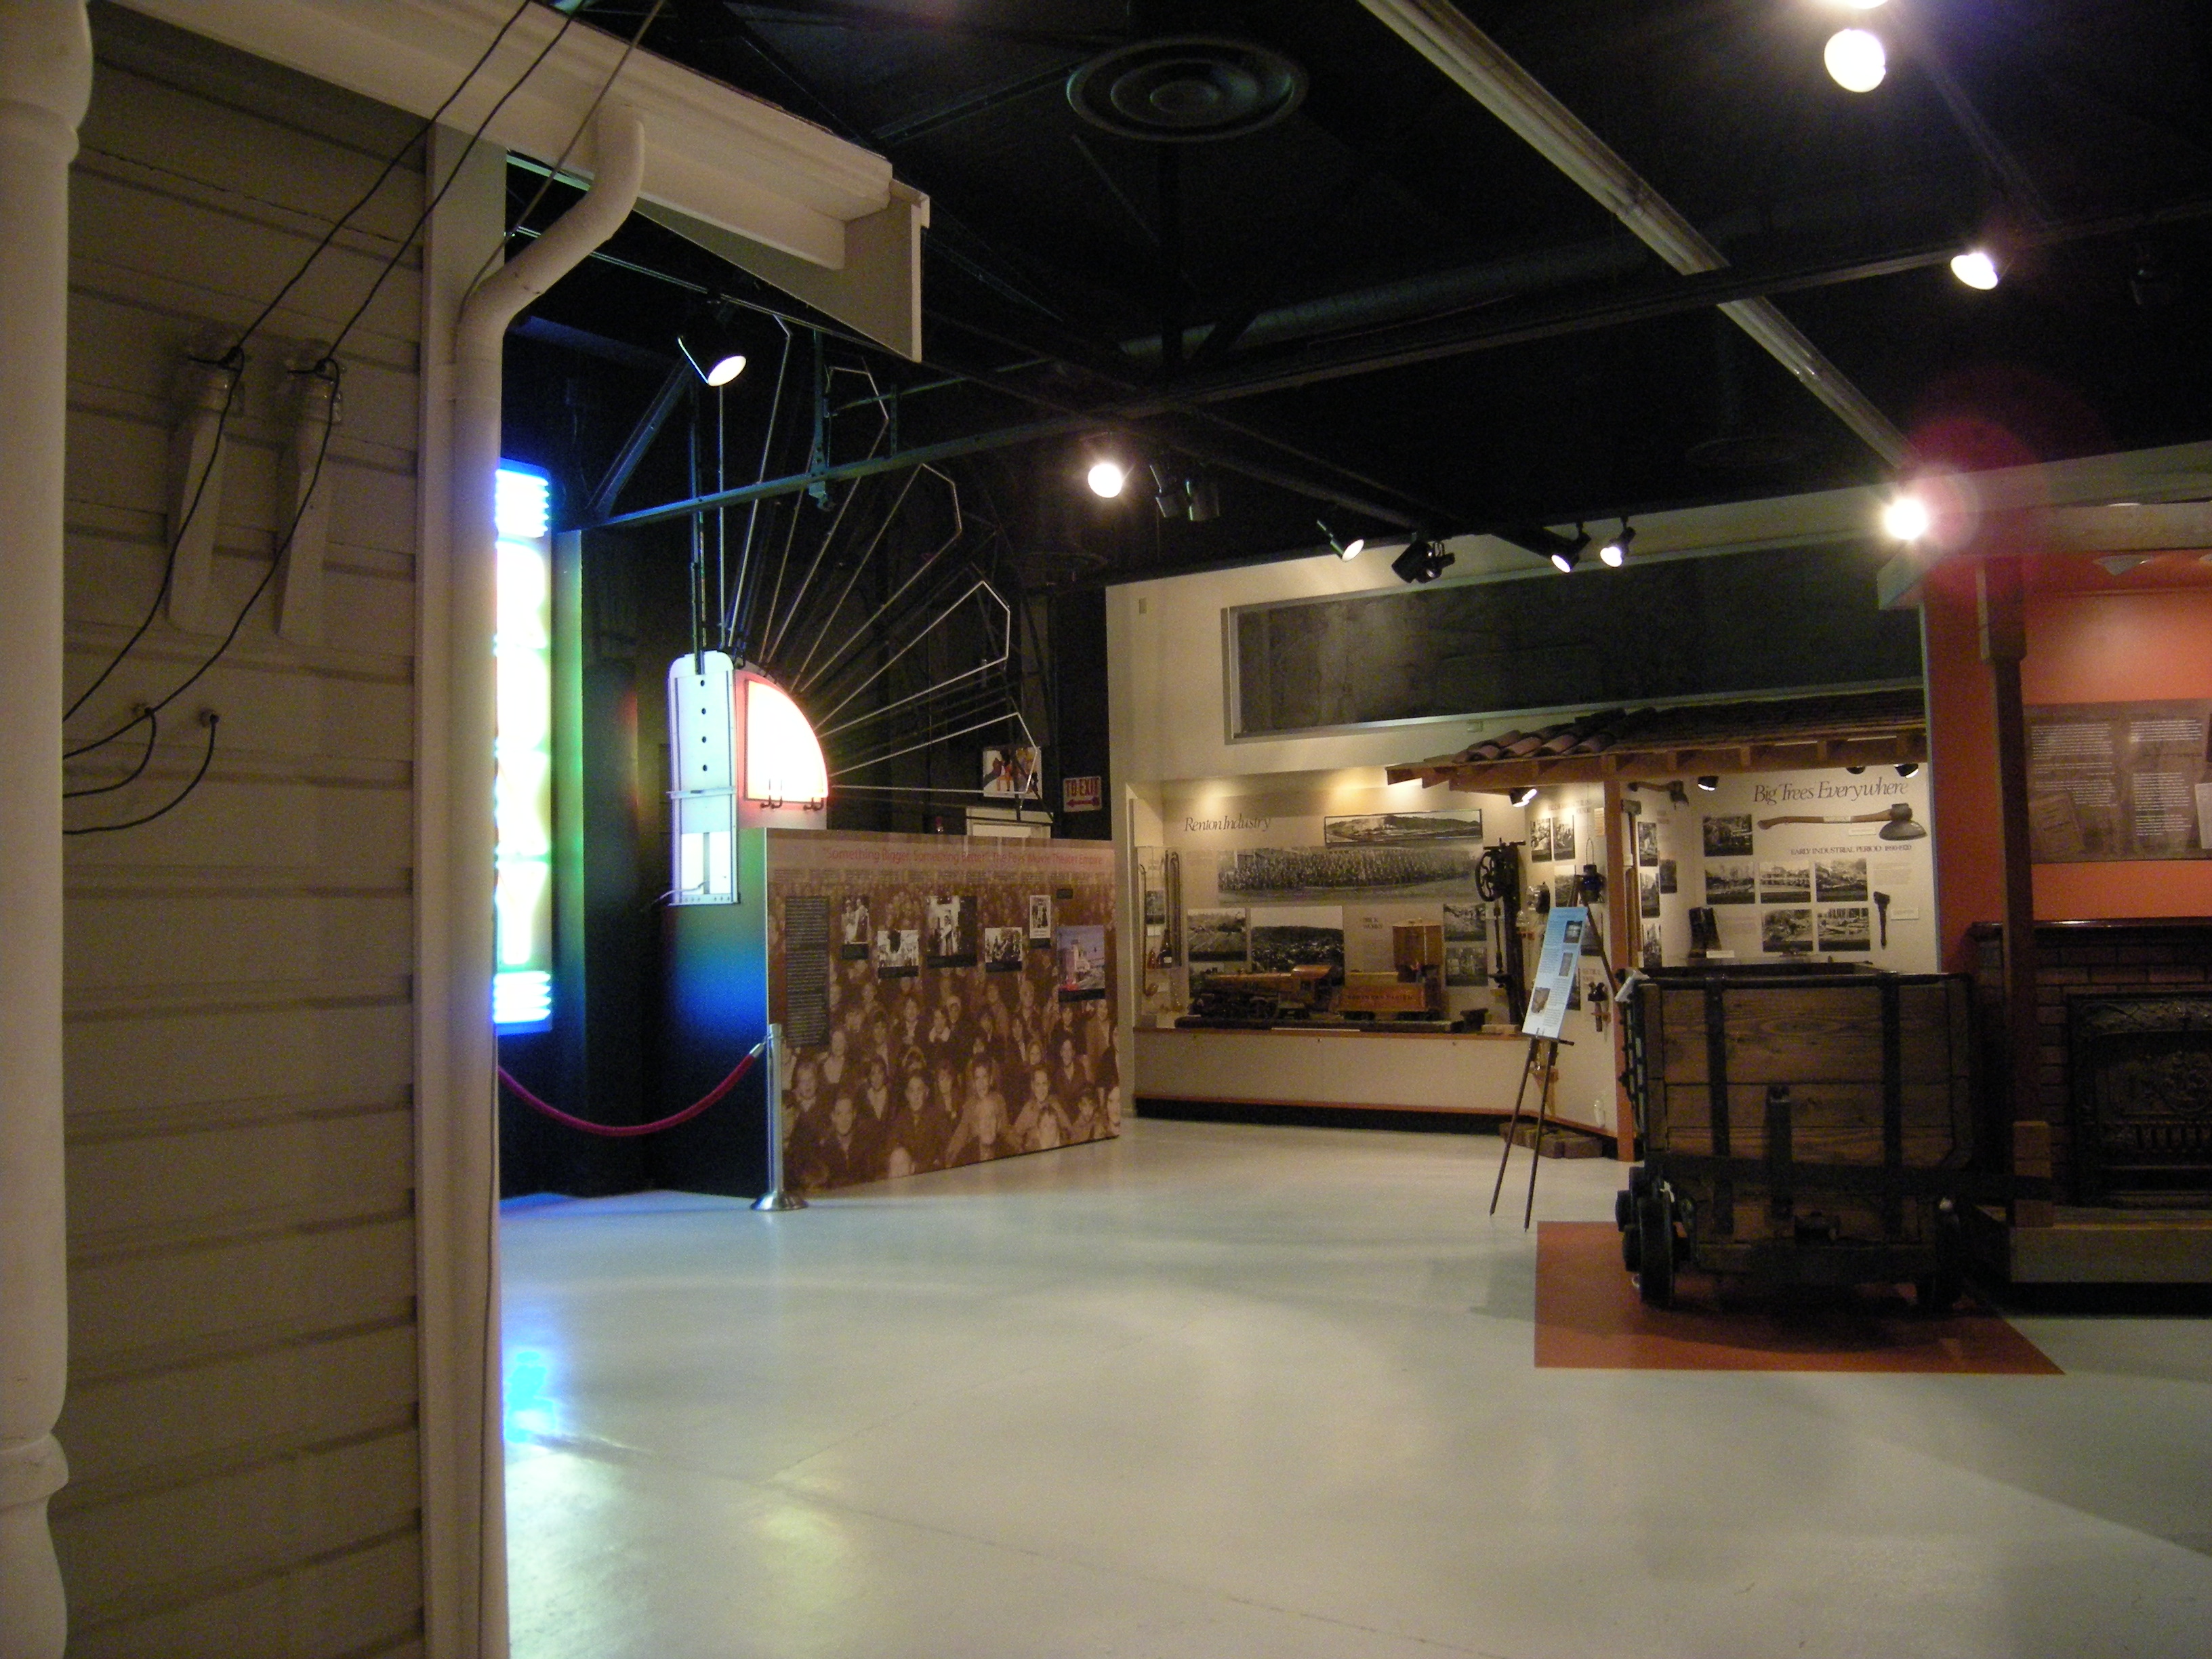 Interior shot of the museum with a refurbished coal car in the foreground.